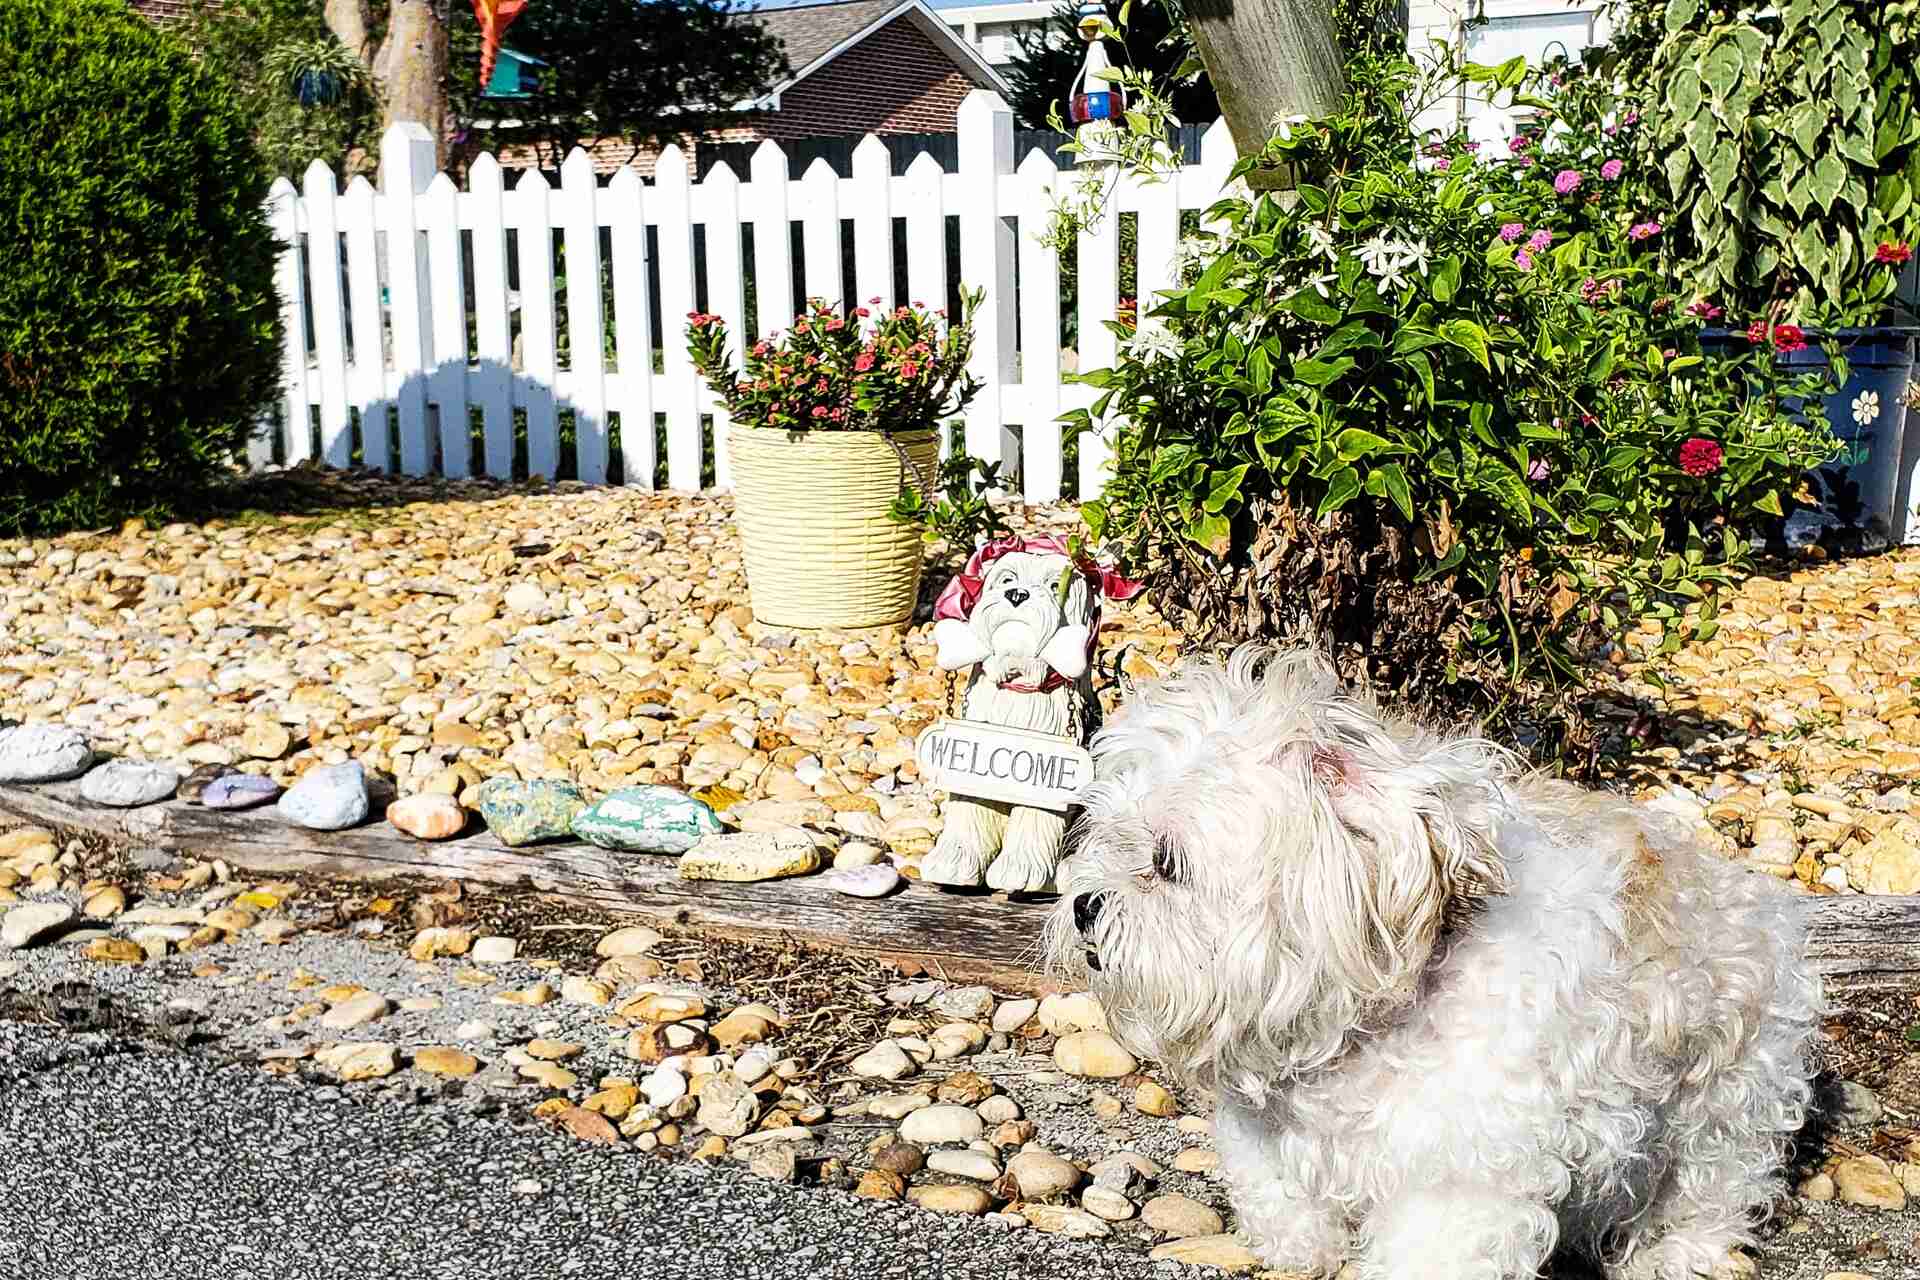 A small white dog sitting in a garden full of flat stones